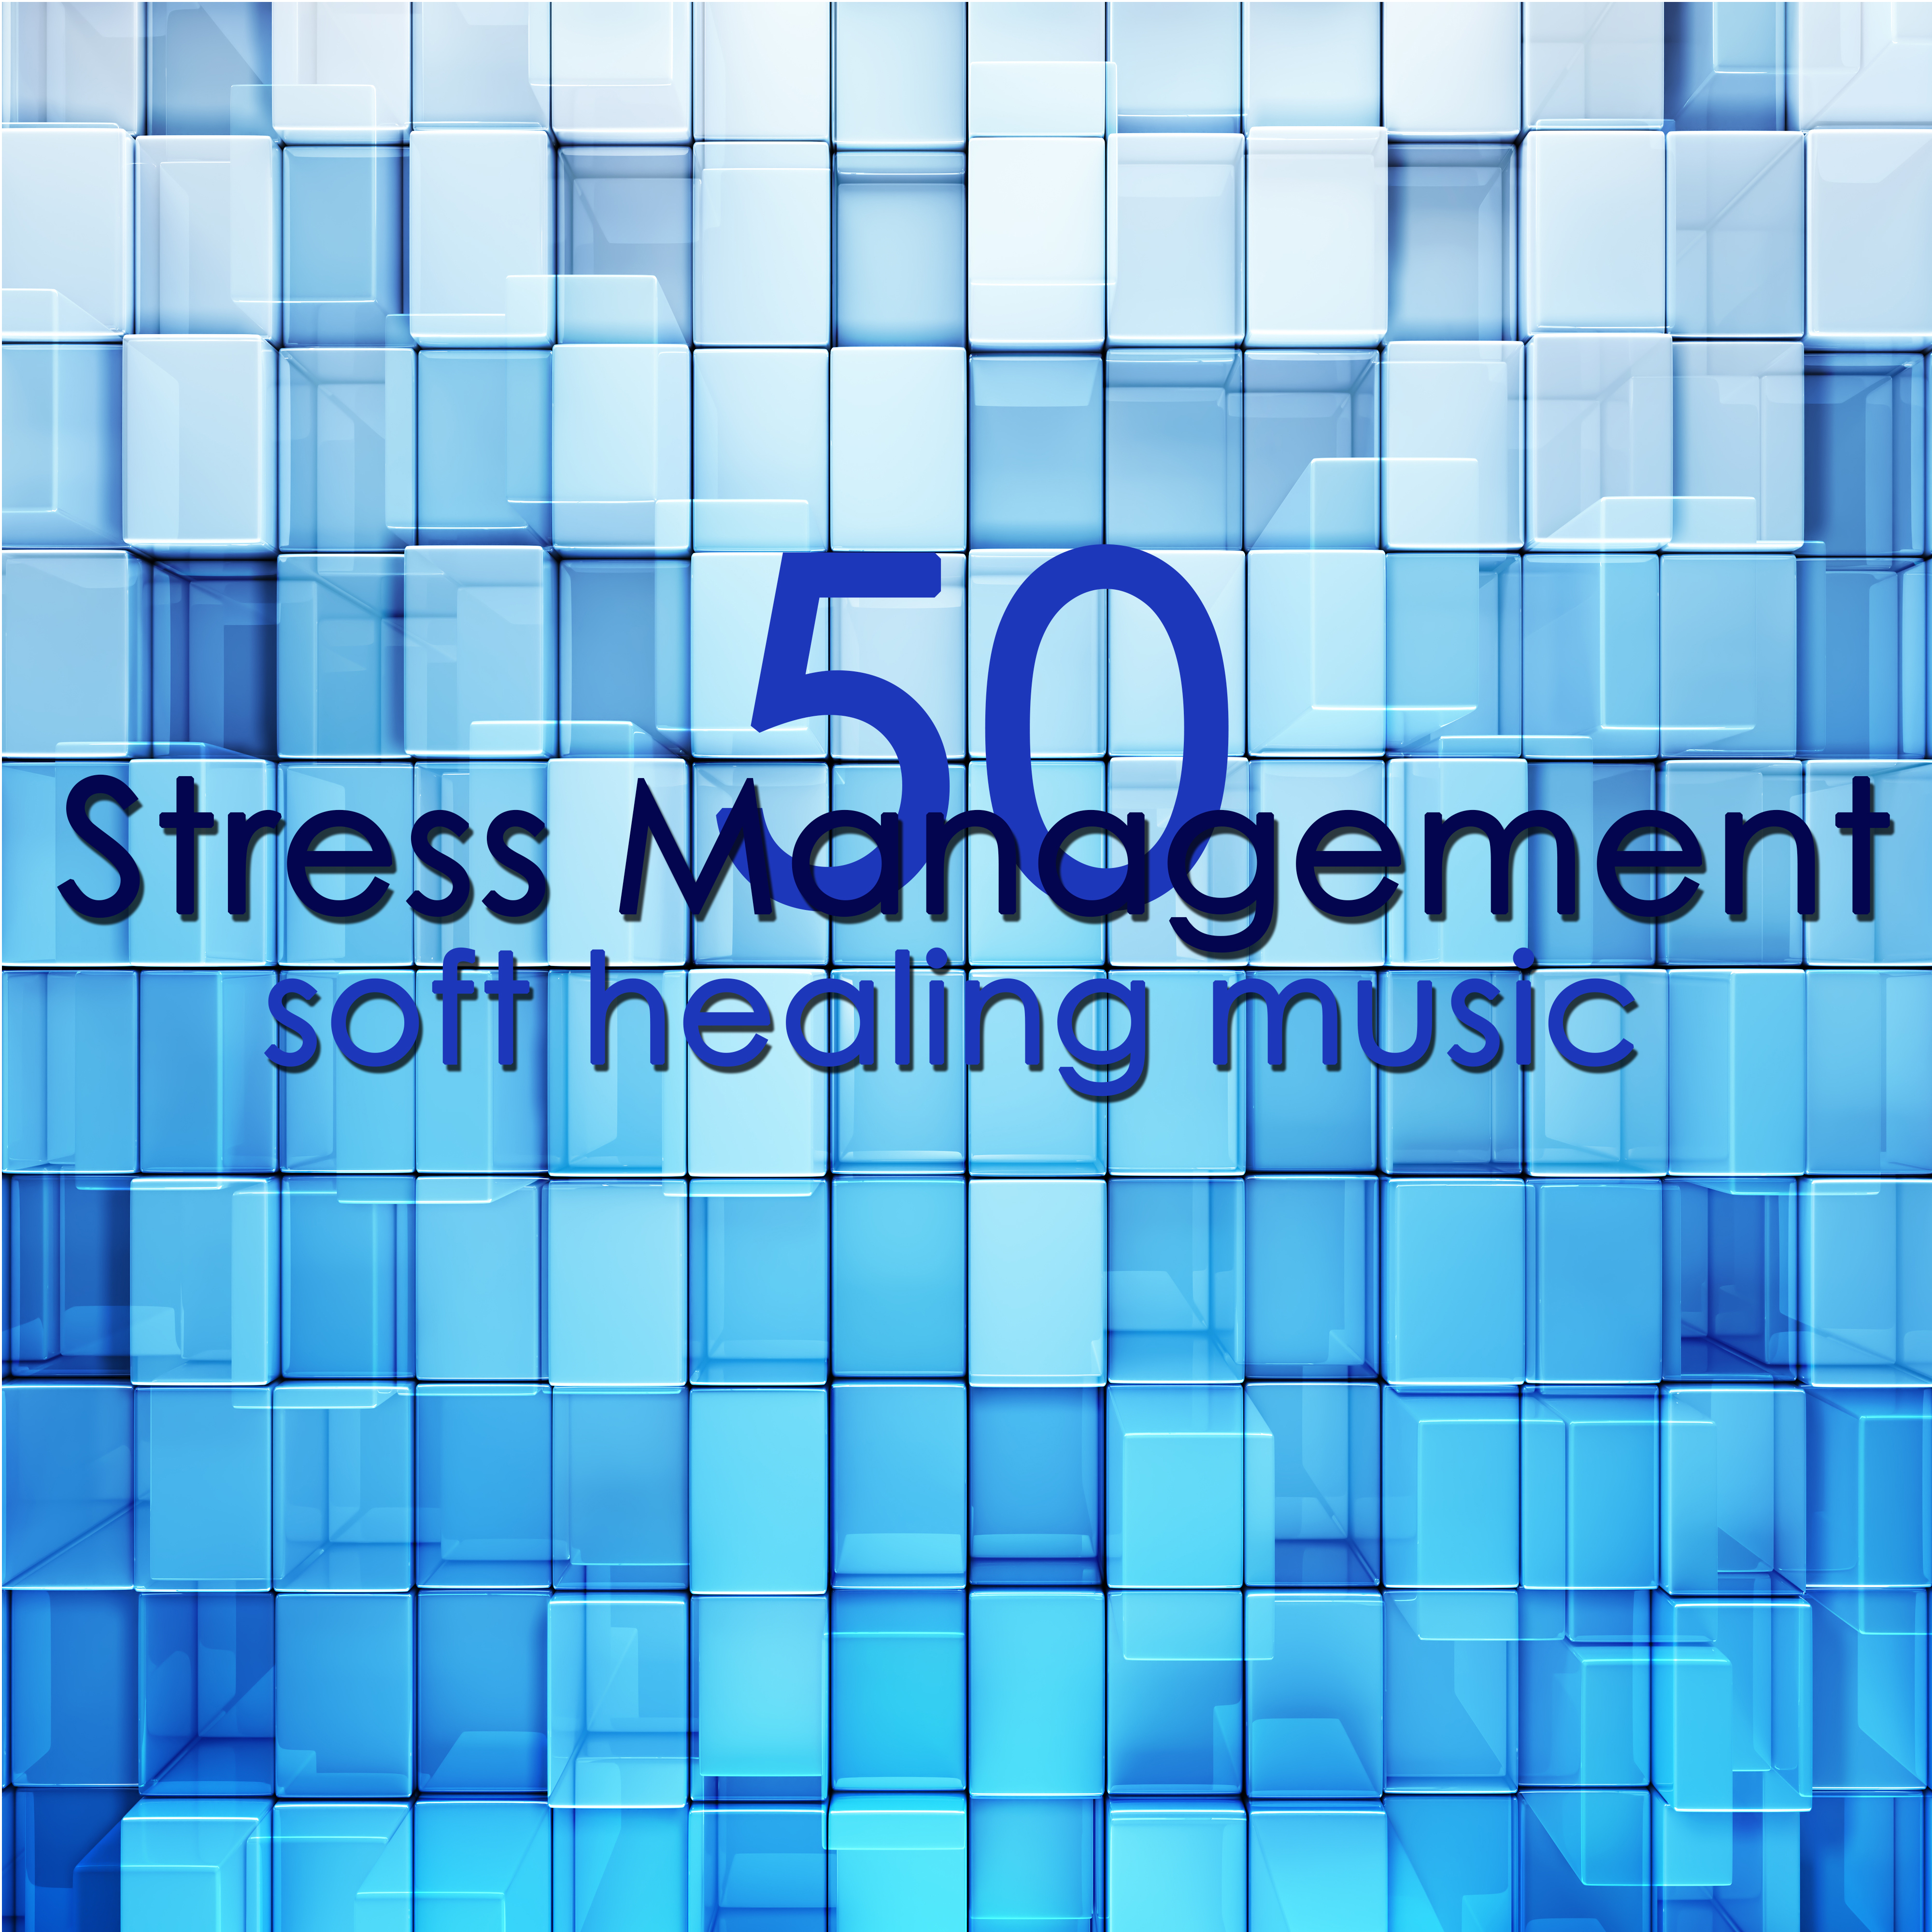 Stress Management Soft Healing Music – 50 Instrumental Songs to Reduce Anxiety & Find Ways to Relax